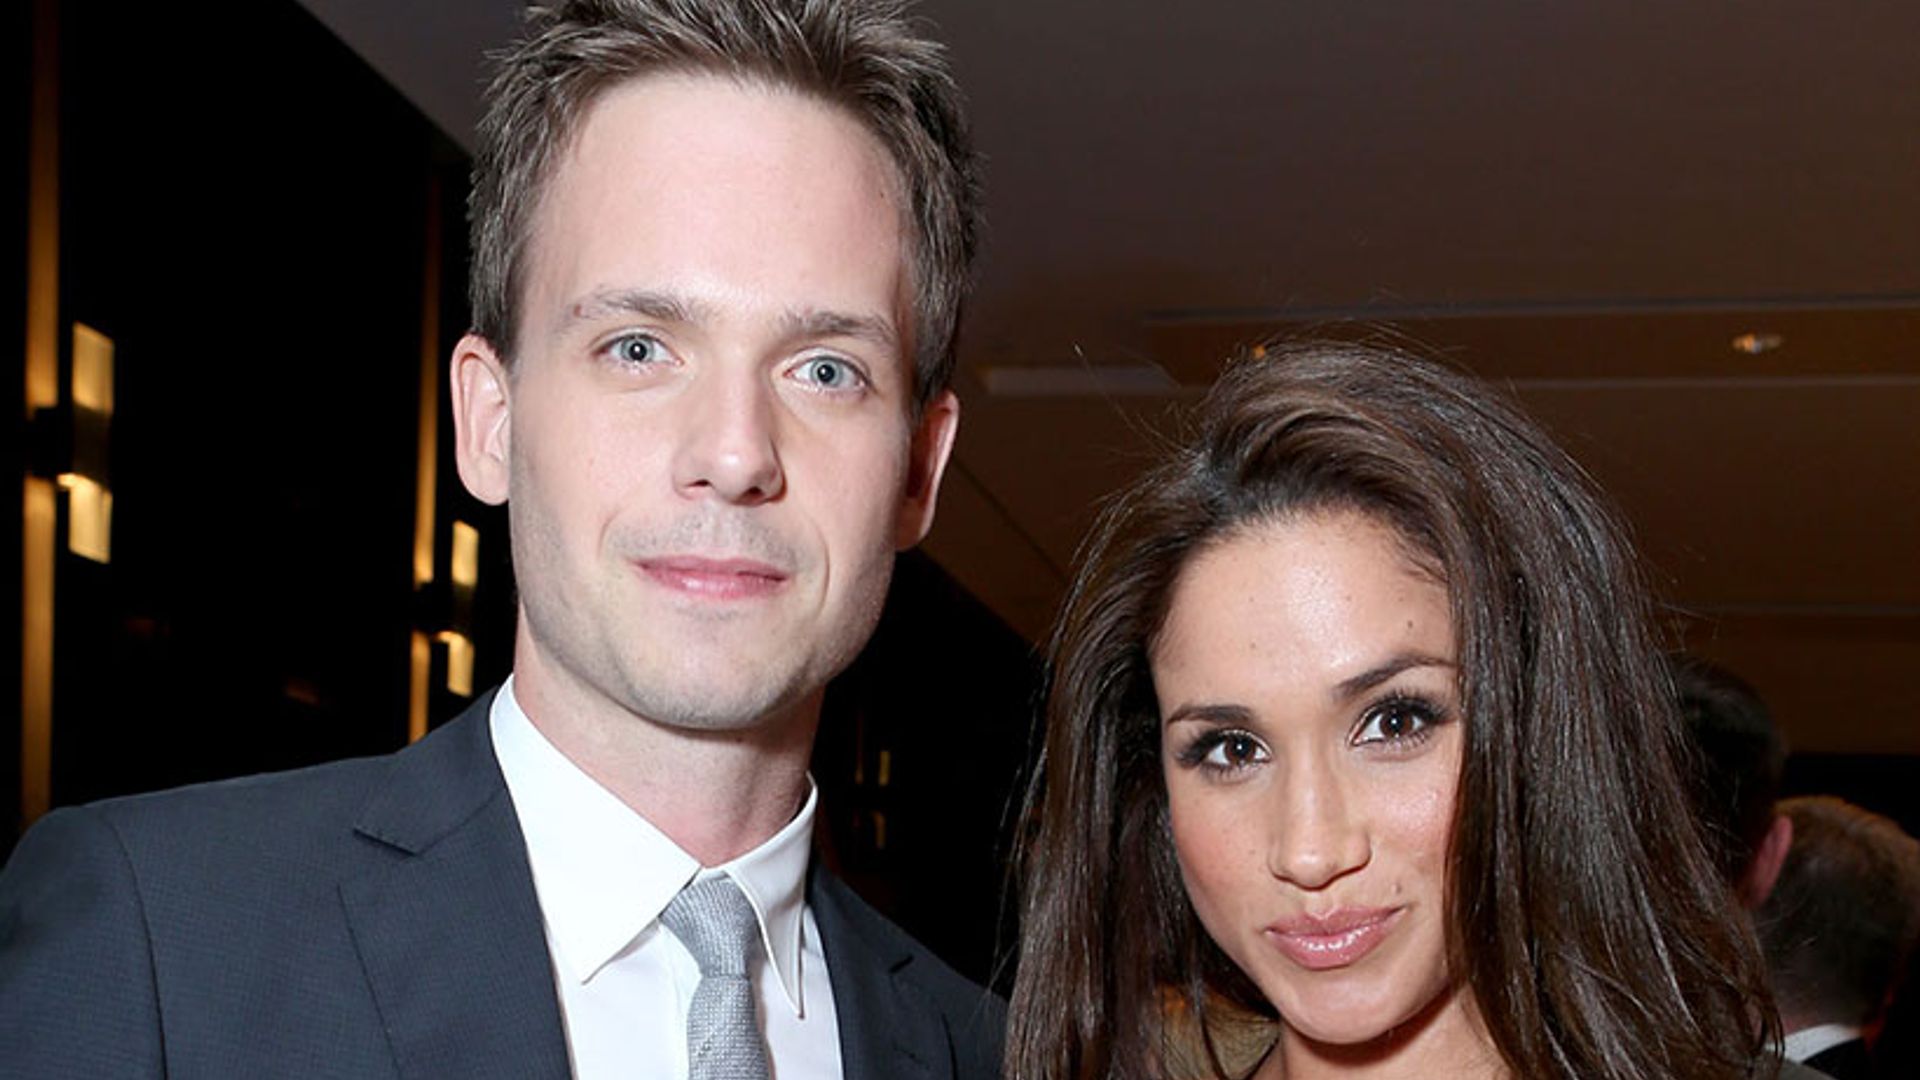 Meghan Markle's co-star kicks off their summer hiatus with sweet throwback photo of the duo